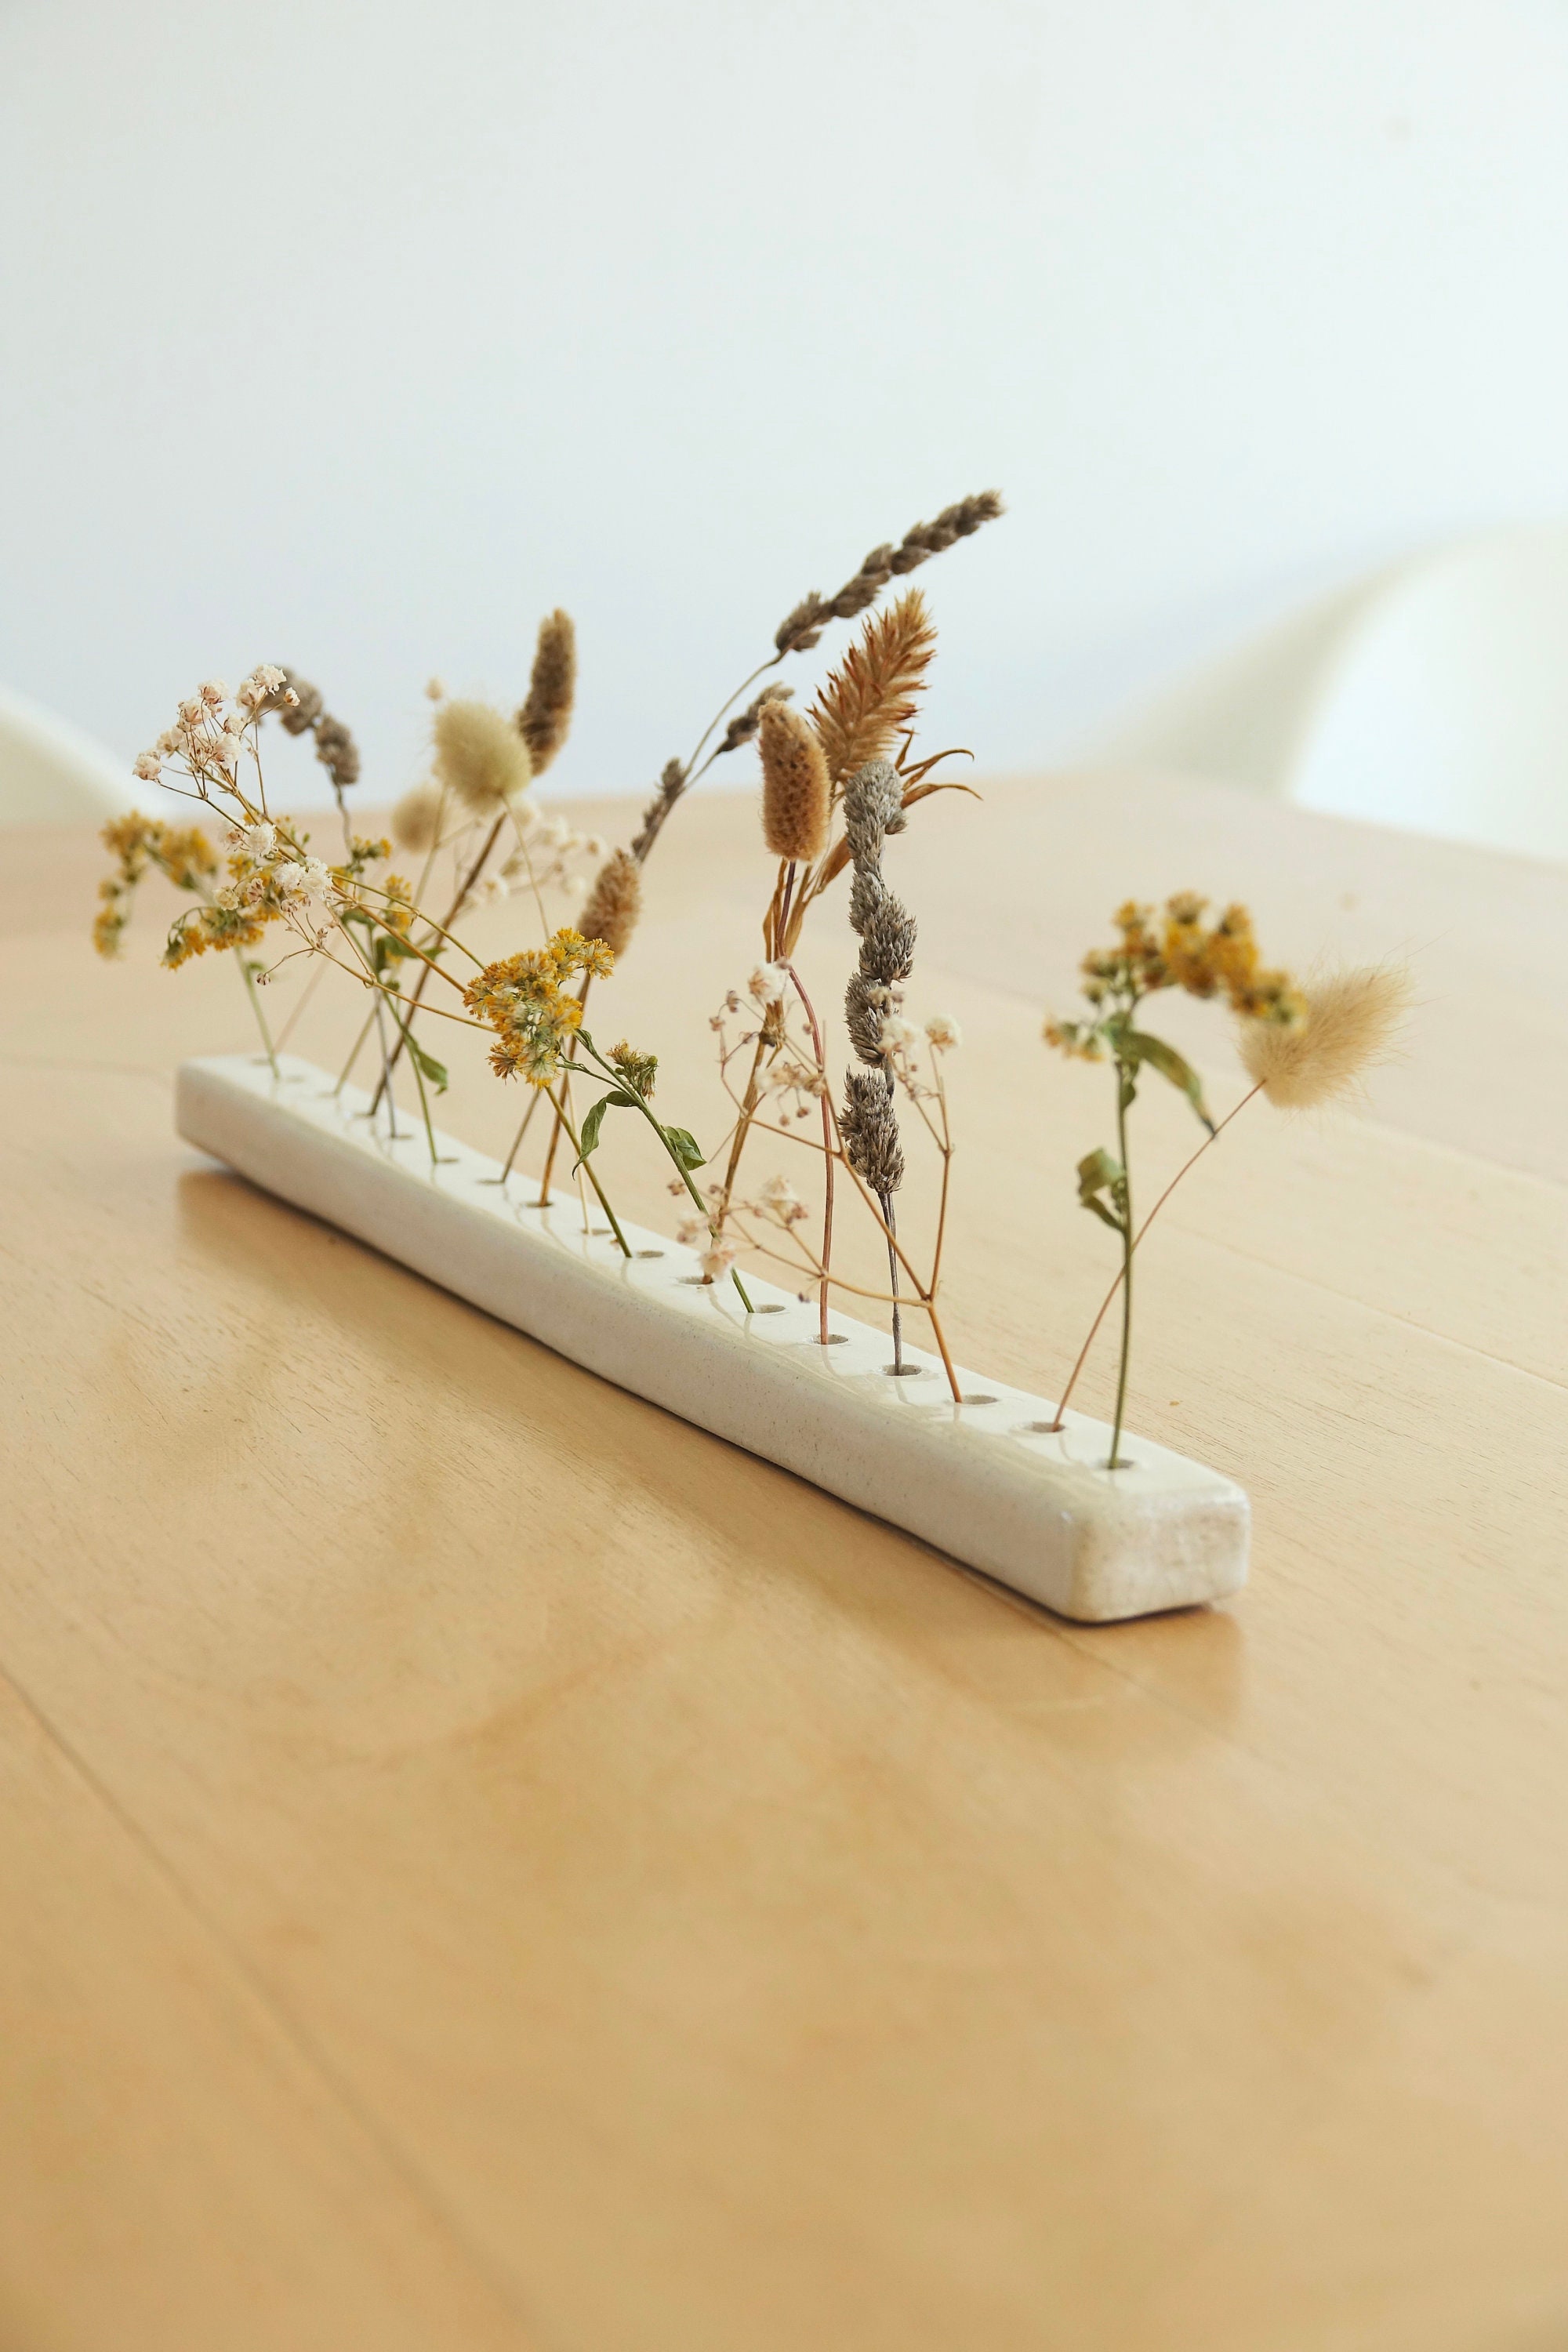 GHY Decor Natural Dried Flowers in Wooden Strip, Flowergram, Pack of 2  Includes Two Sets of Wooden Flower Arrangements 